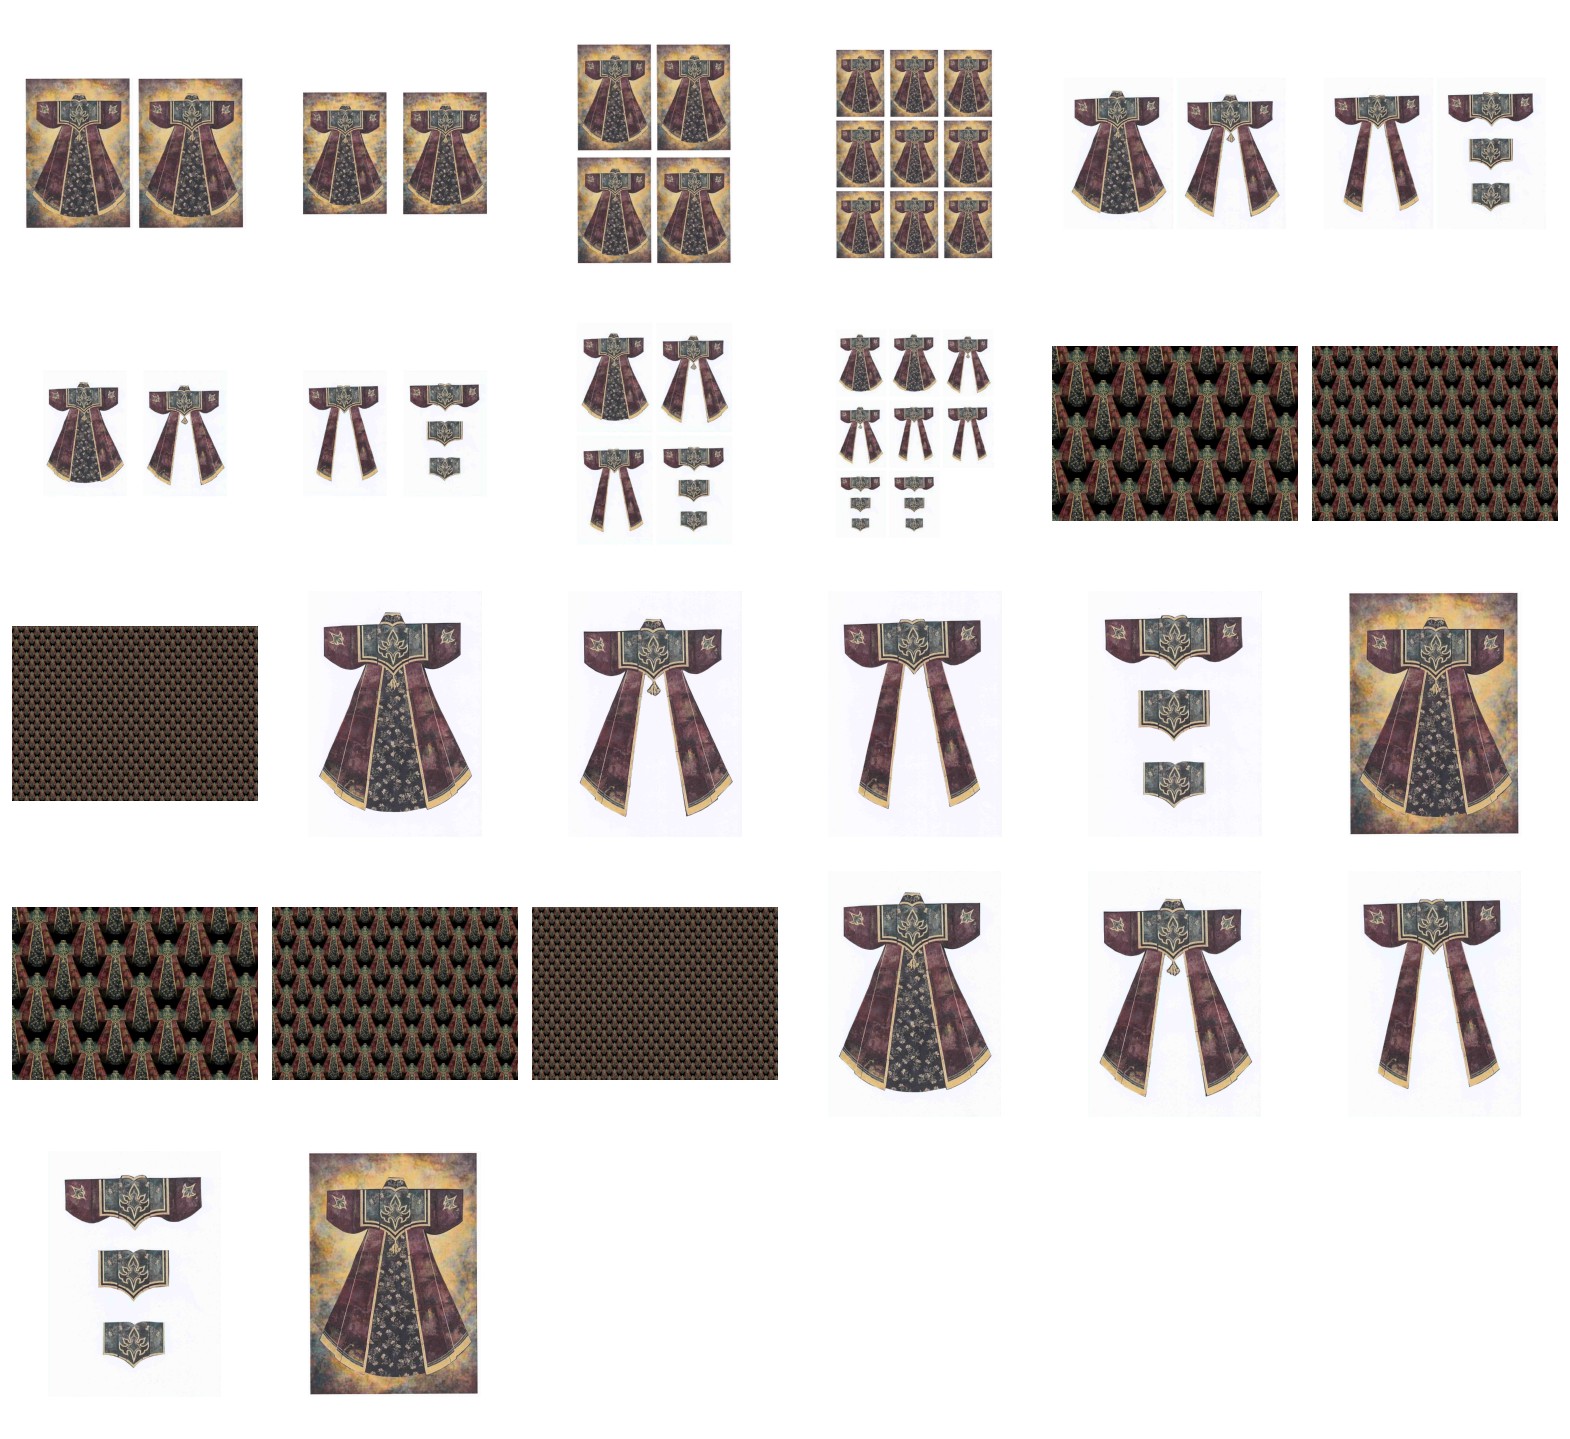 Kimono Set 07 Download - at least 24 Pages